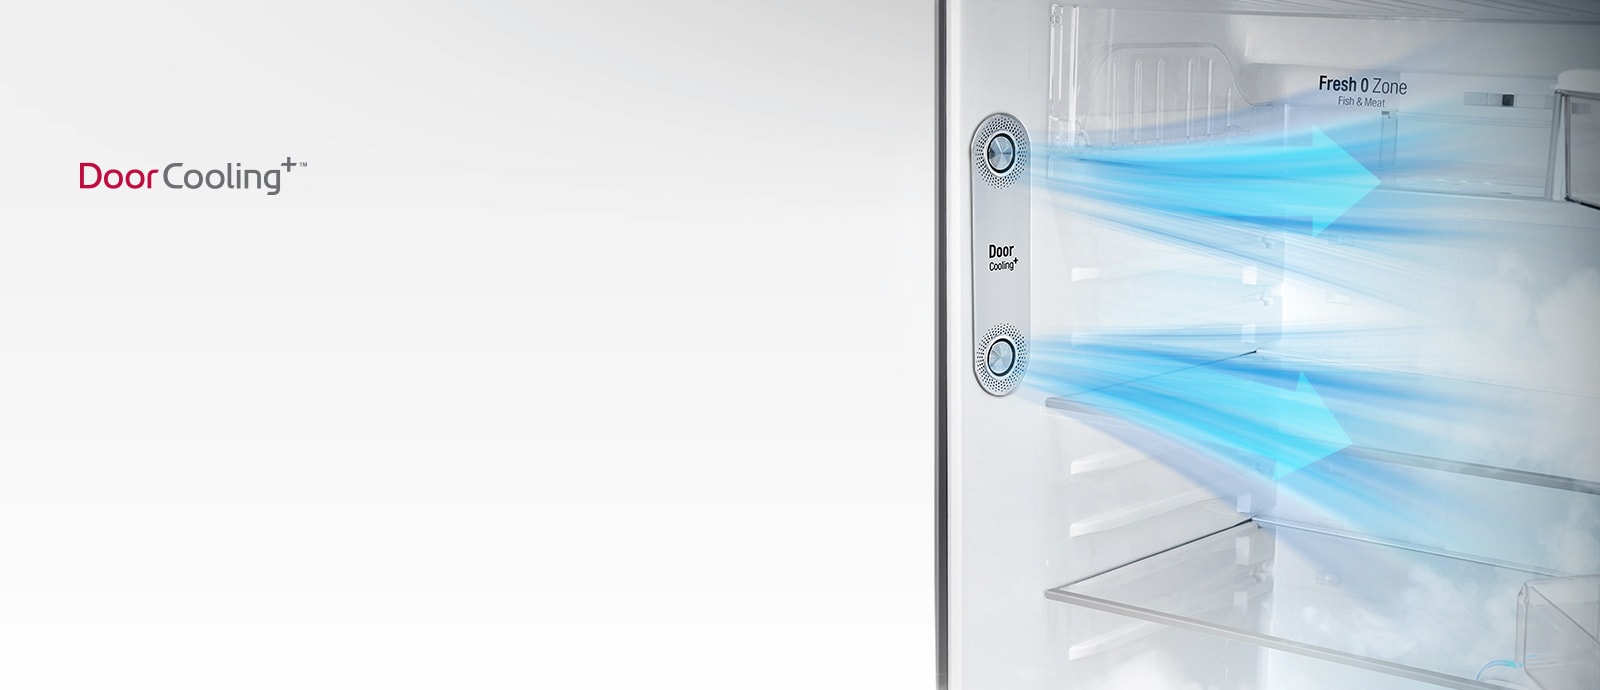 GL-M502AS_Top-Freezer-Refrigerators_Even-Fast-Cooling-in-Any-Where_D